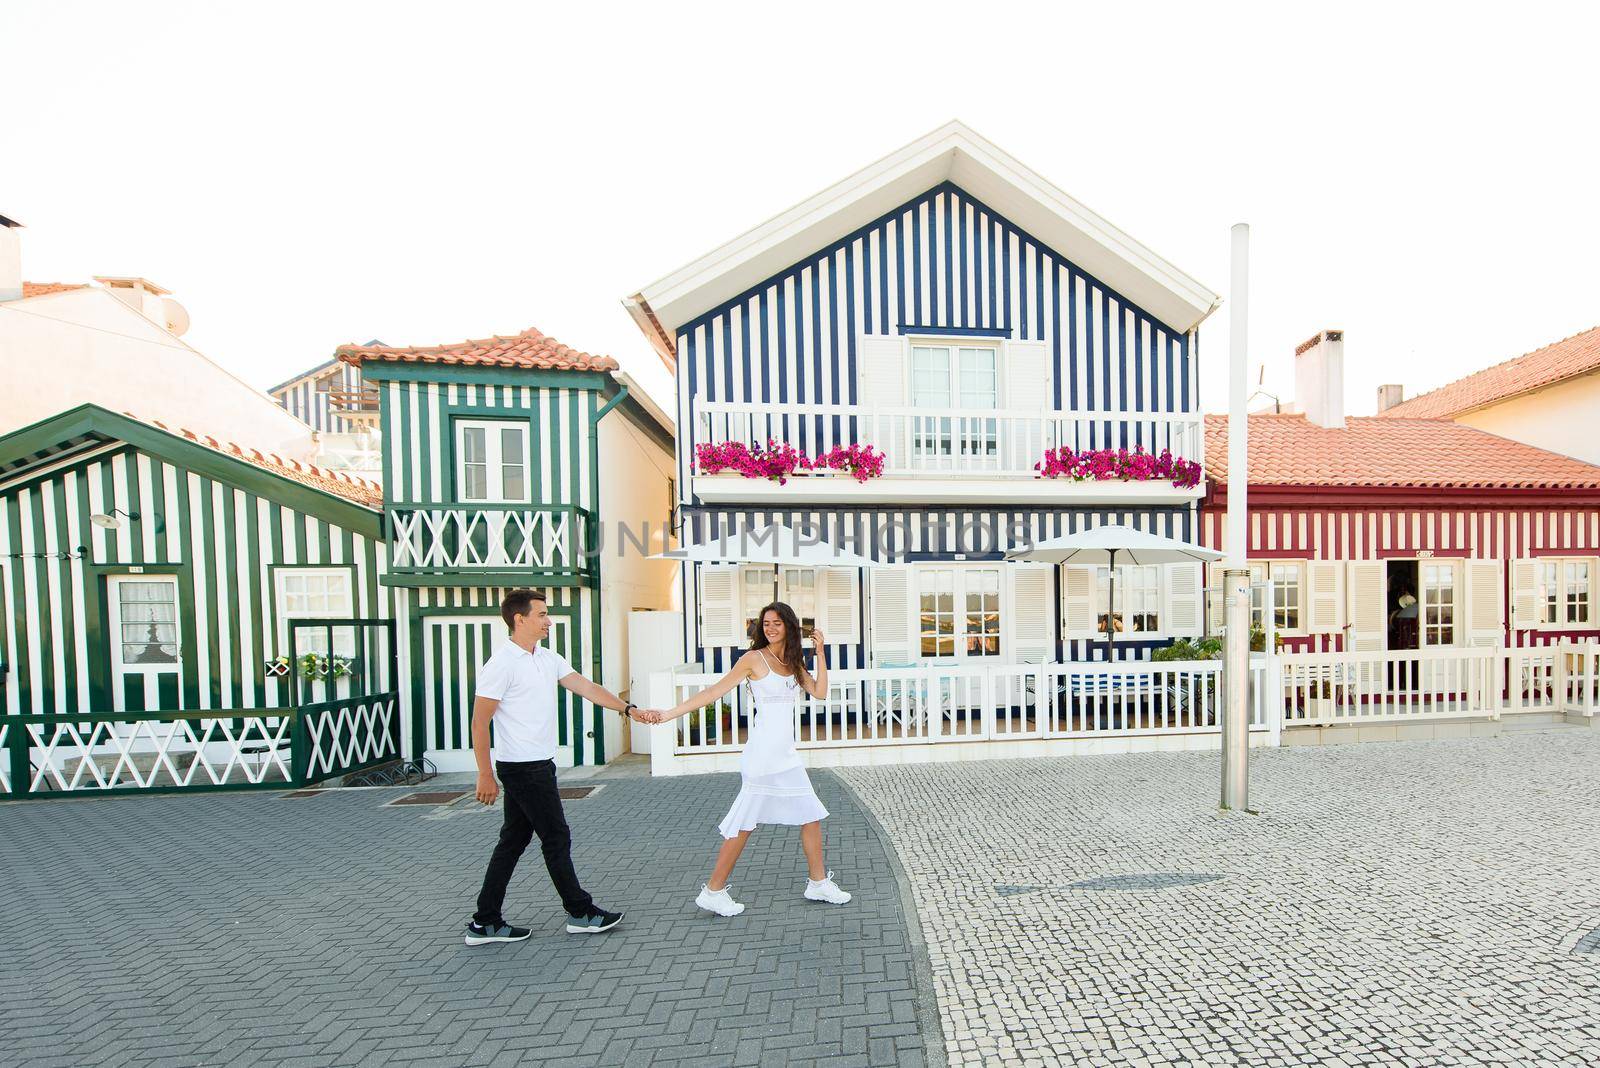 Young couple in white clothes walks around street in Aveiro, Portugal near colourful and peaceful houses. Lifestyle. Having fun, laughs, smiles